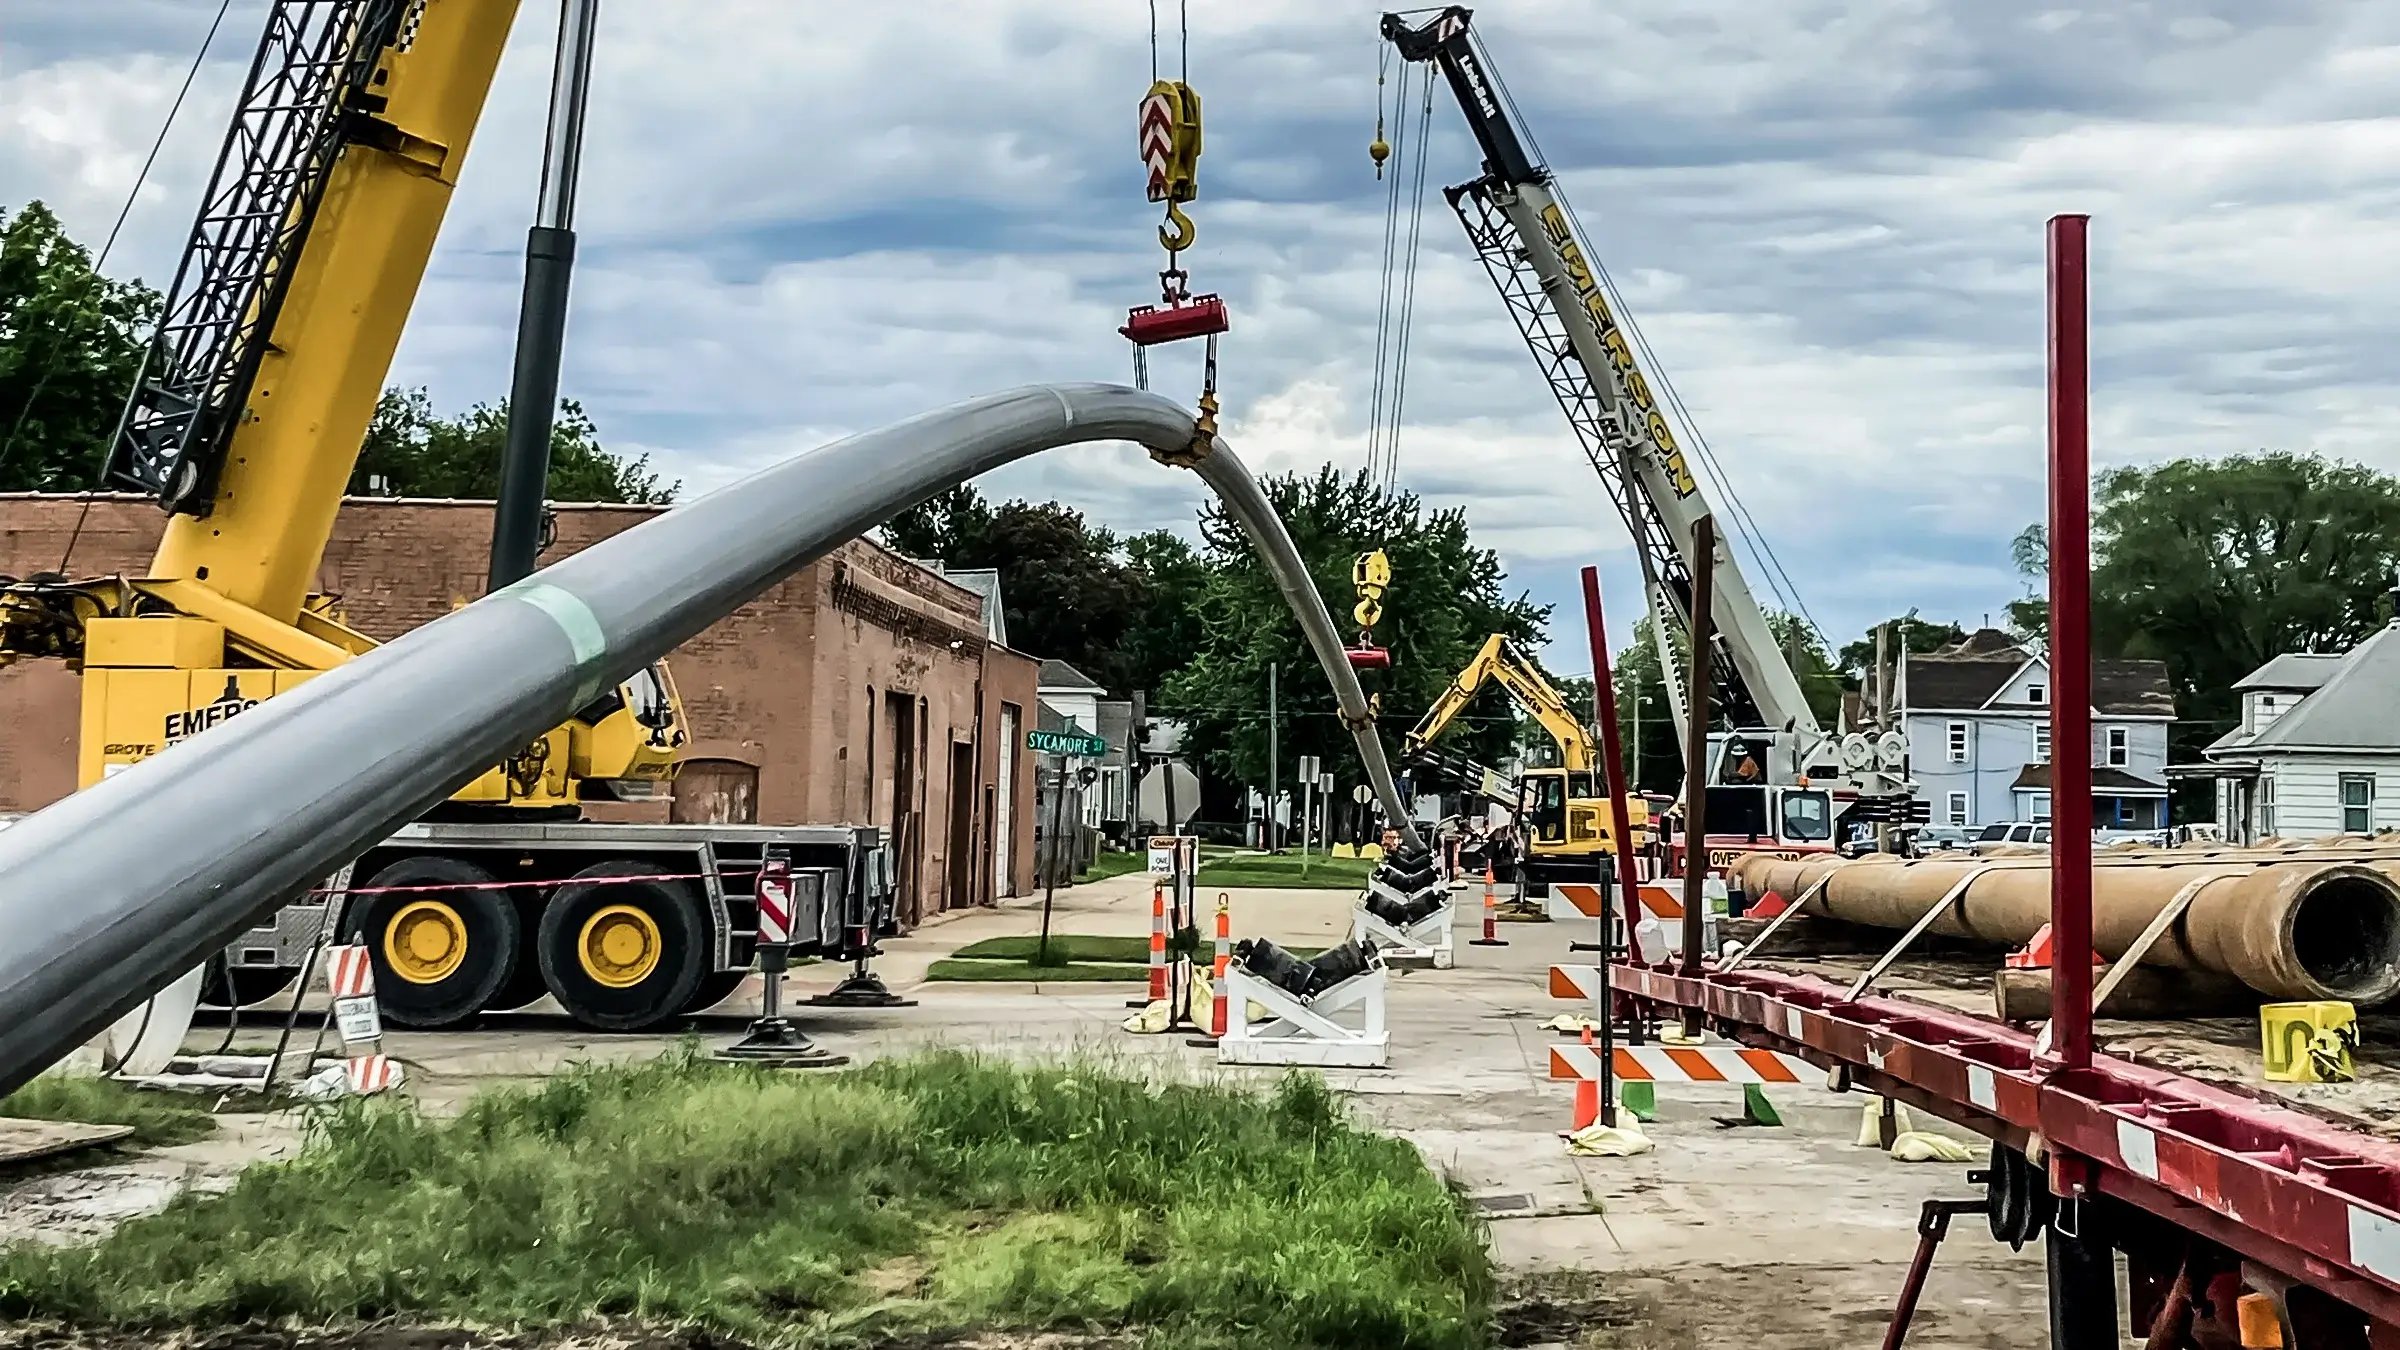 Several cranes assist in guiding pipeline into ground near residential homes